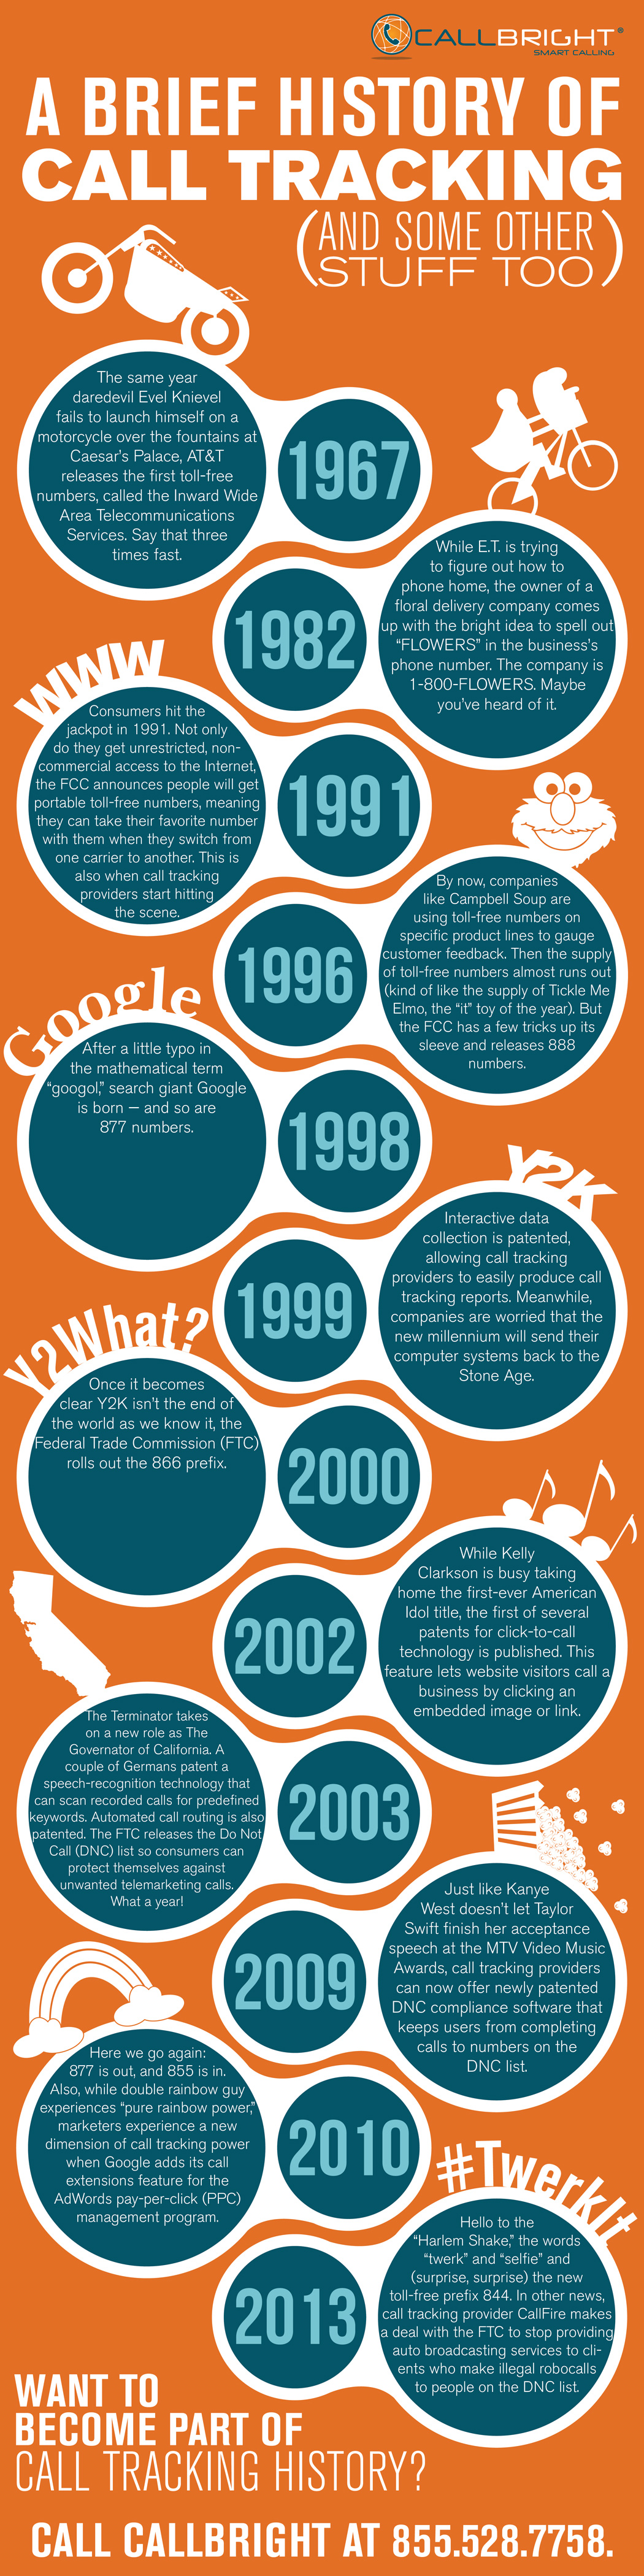 [INFOGRAPHIC] A Brief History of Call Tracking (And Some Other Stuff Too)